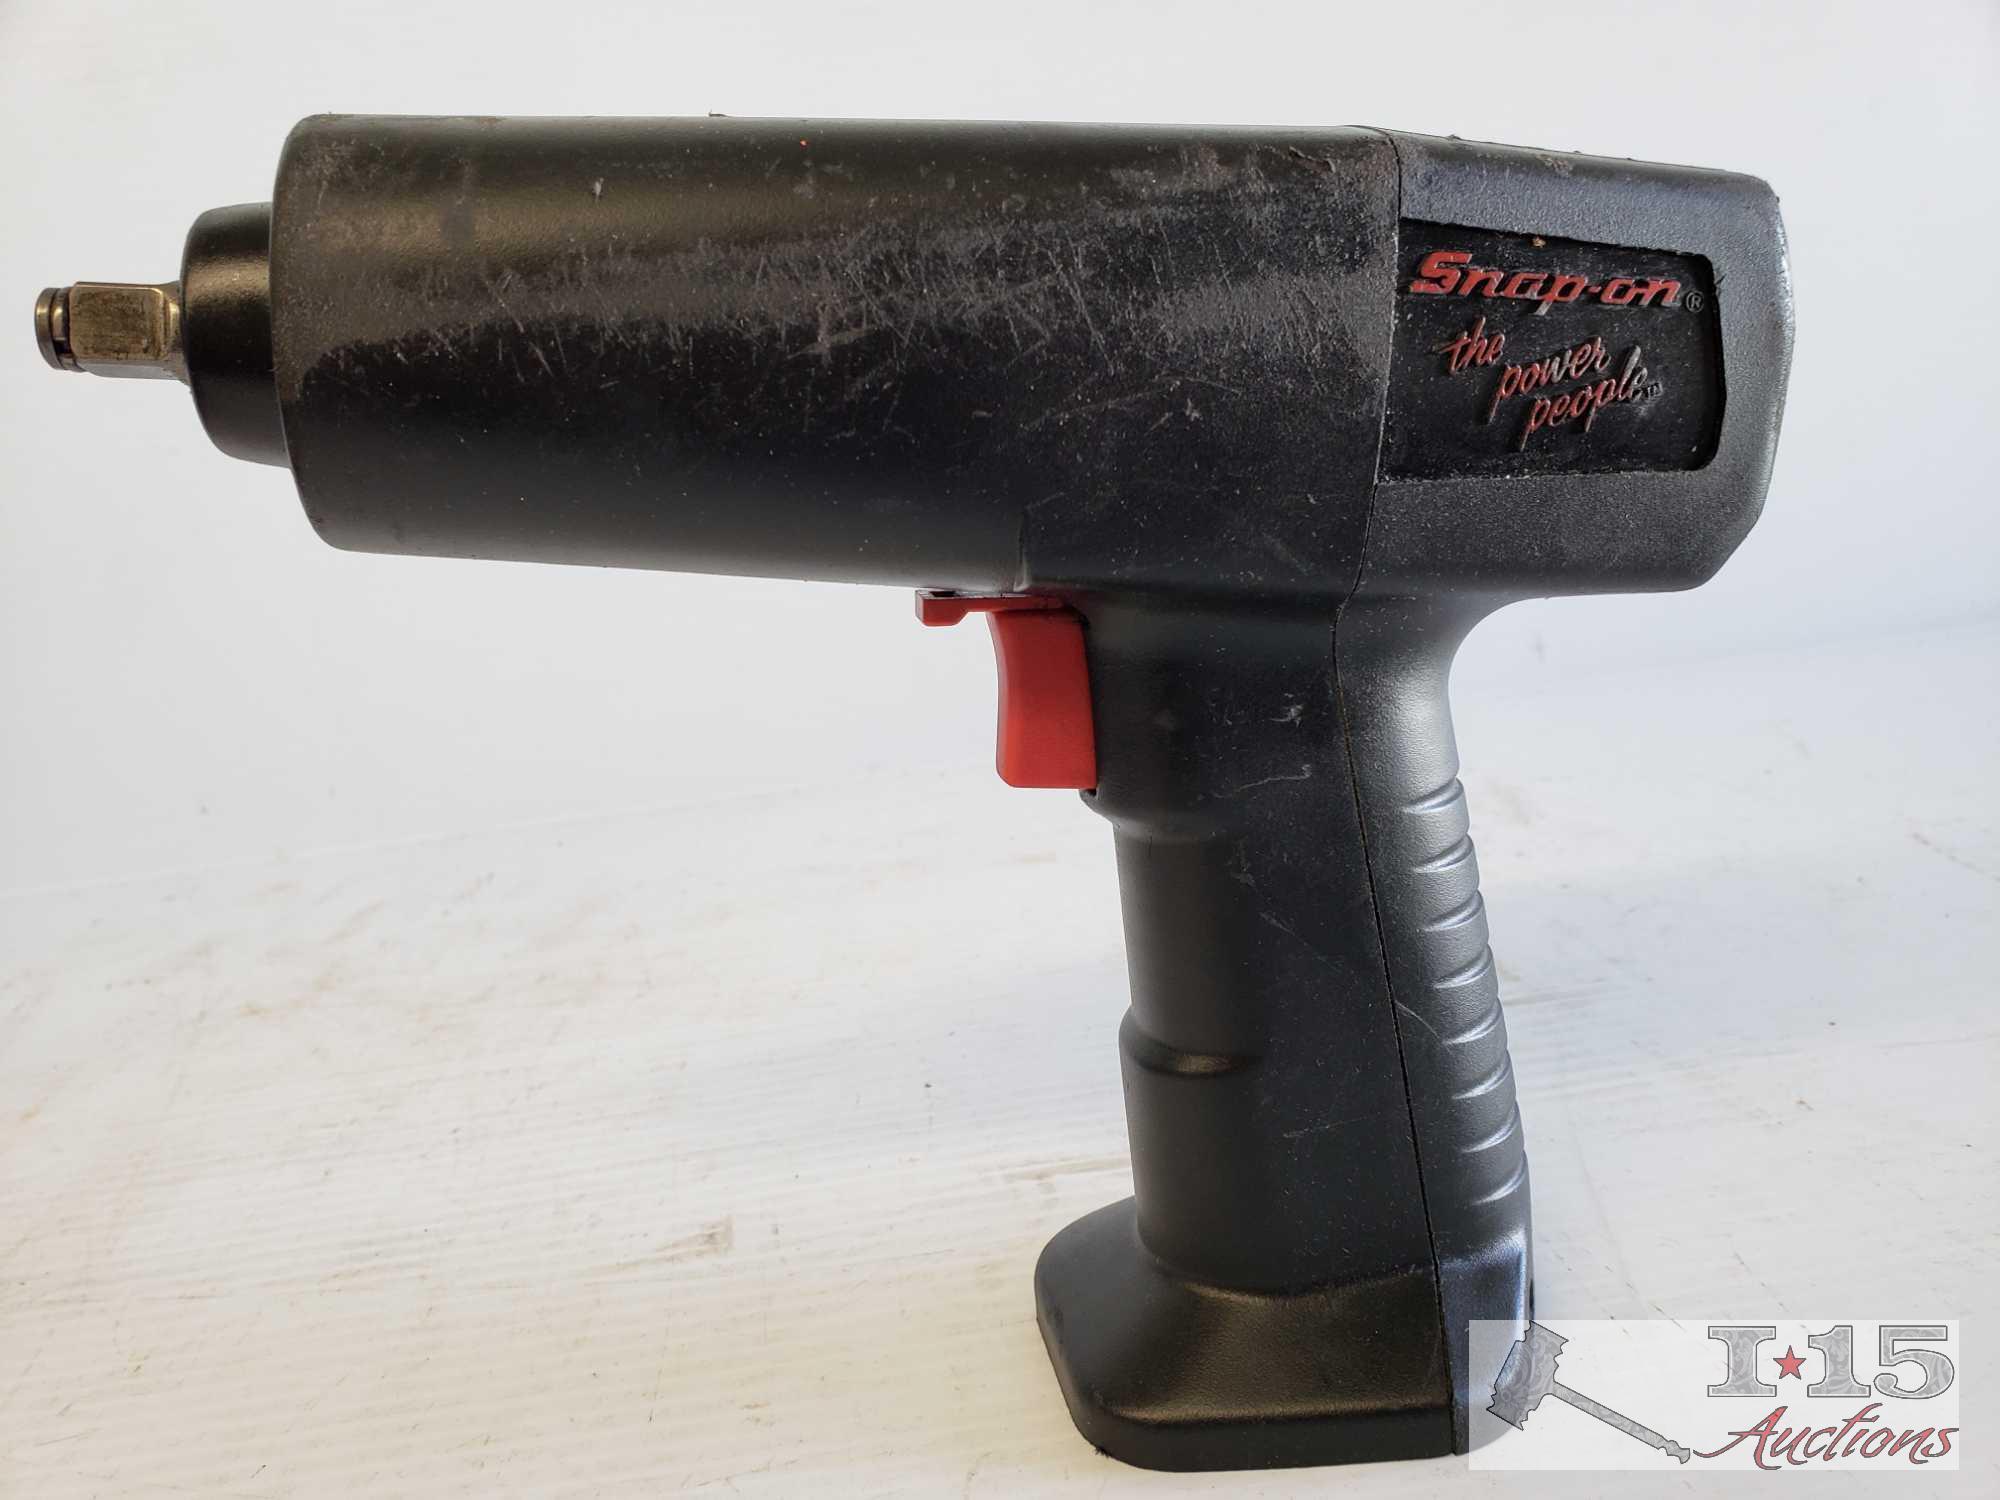 Snap-On Tools- 3/8" Drive Impact Wrench, Model CT30